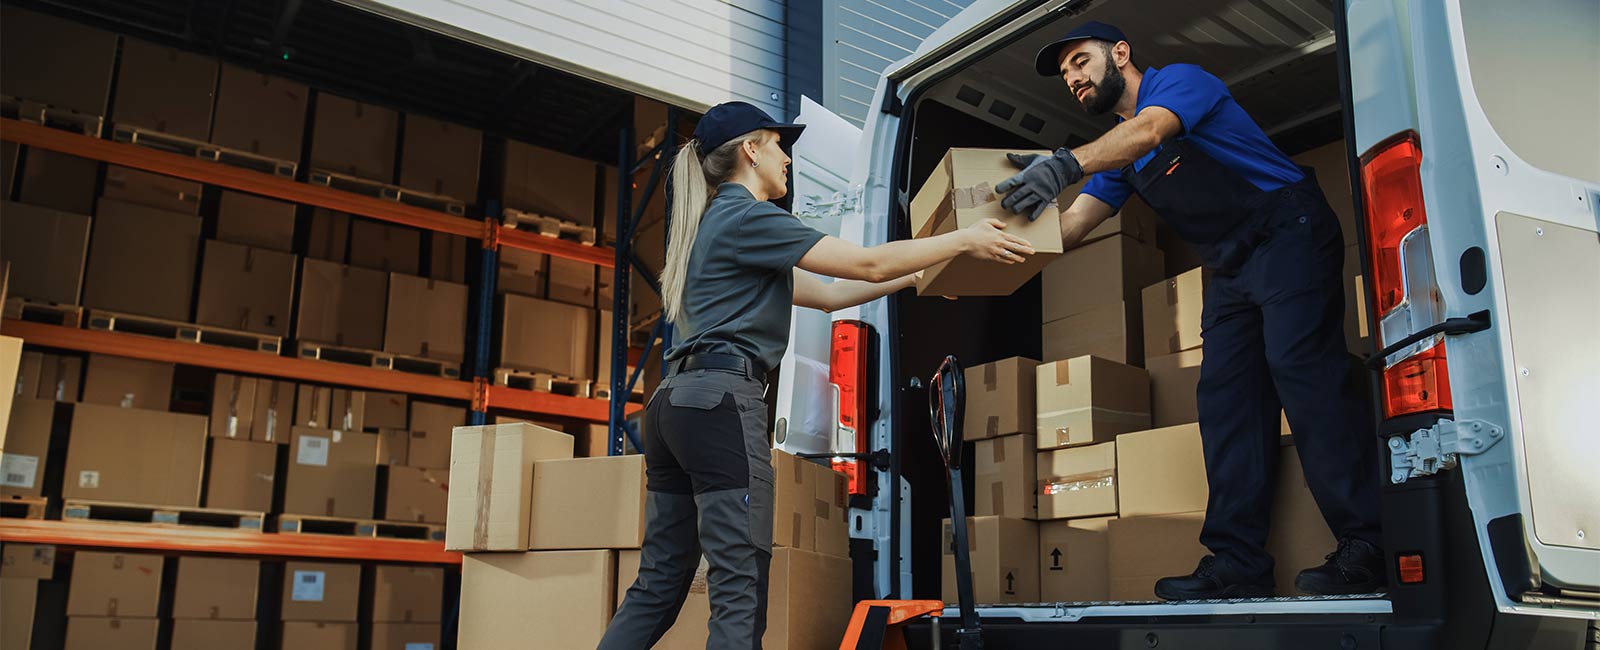 A man in a van full of boxes hands one box to a female warehouse worker.